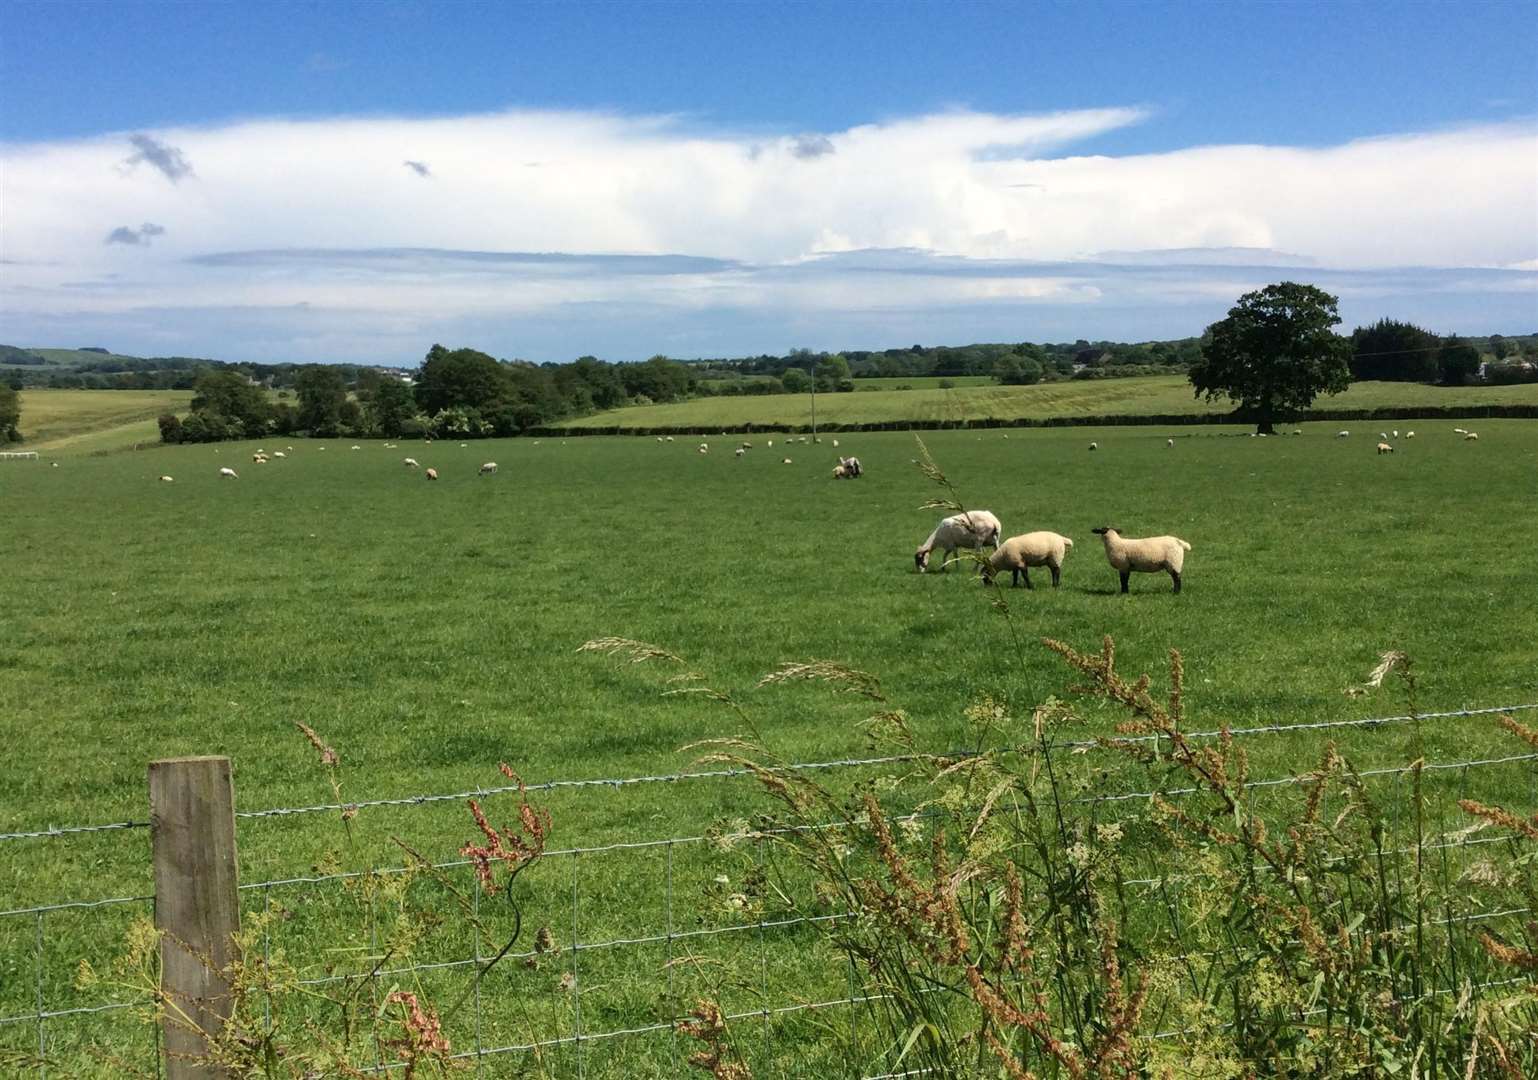 The farming land that could be swallowed up if the new Otterpool town development goes ahead